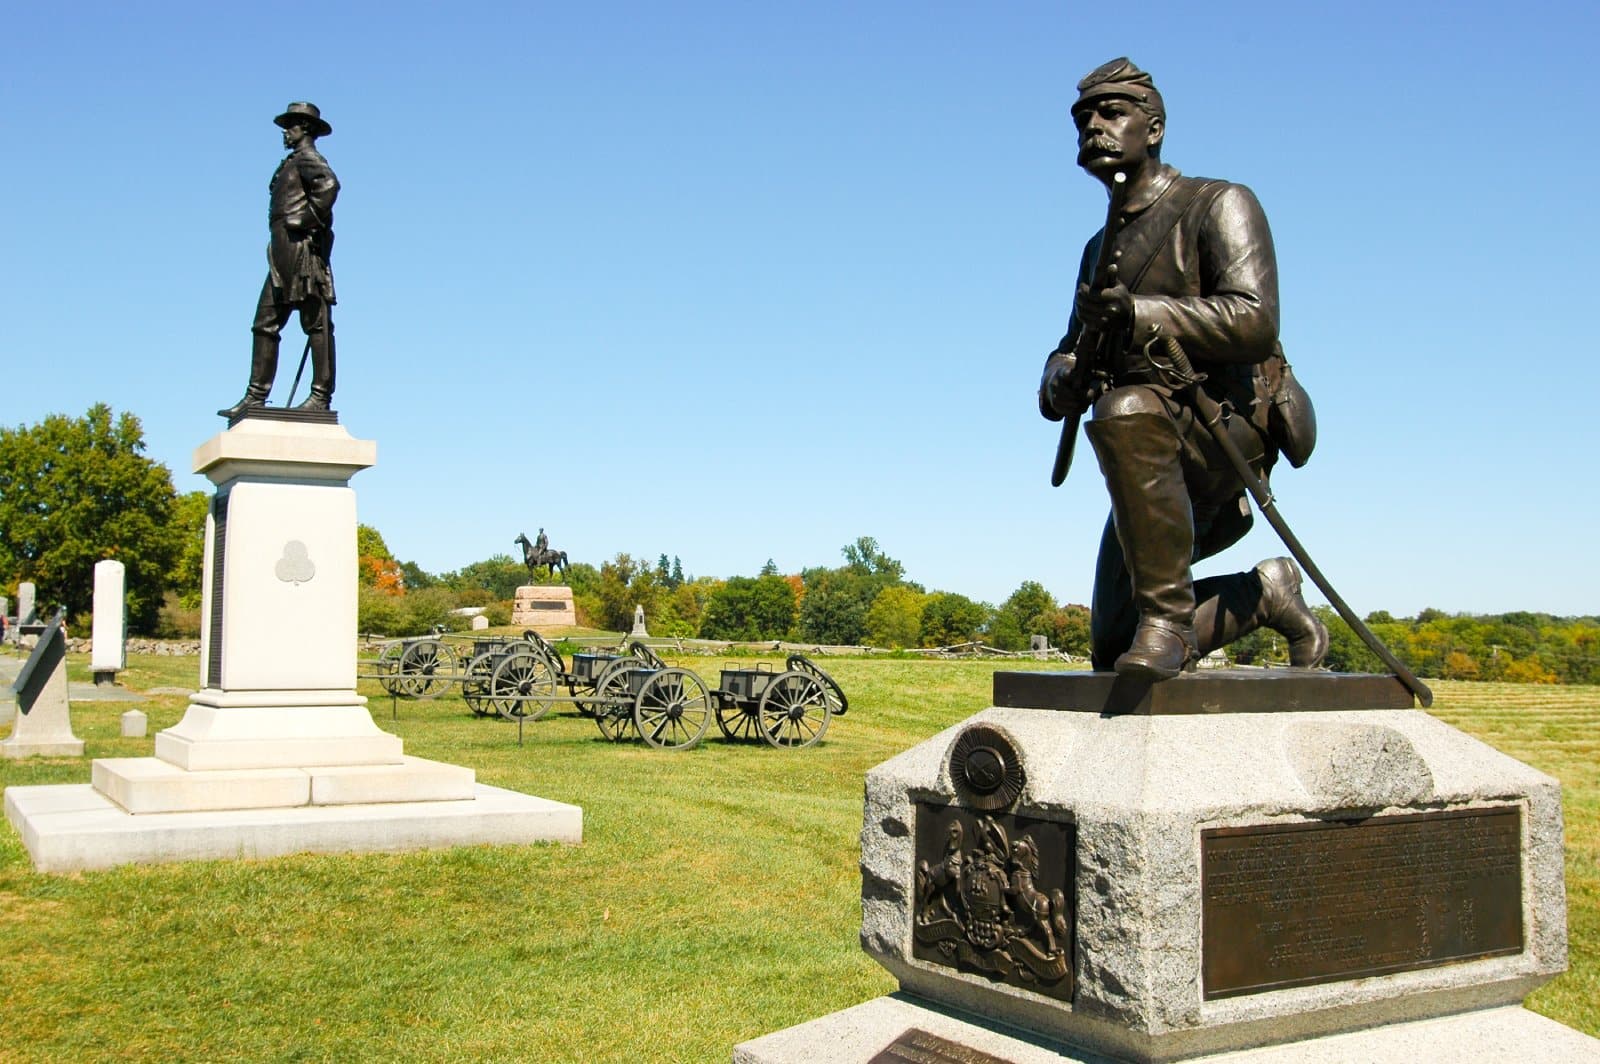 <p class="wp-caption-text">Image Credit: Shutterstock / Jeffrey M. Frank</p>  <p>The site of the Civil War’s most famous battle and President Lincoln’s iconic Gettysburg Address. Walking this vast battlefield underscores the war’s scale and its profound human cost.</p>